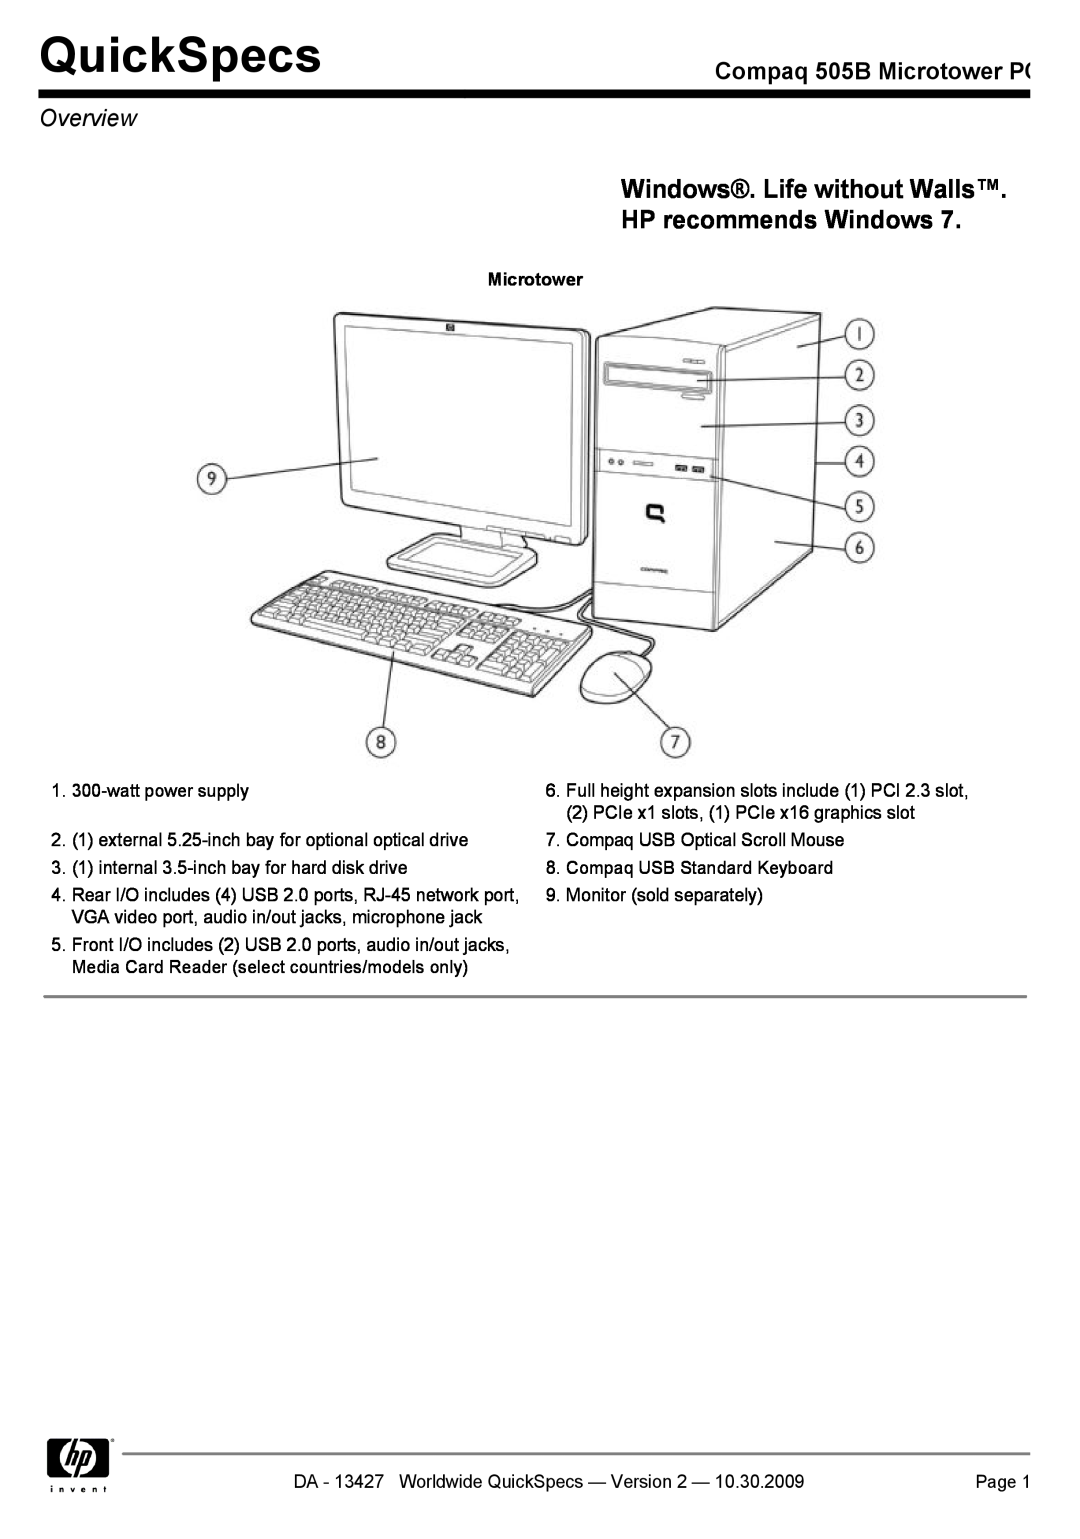 Compaq manual QuickSpecs, Windows. Life without Walls HP recommends Windows, Compaq 505B Microtower PC, Overview 